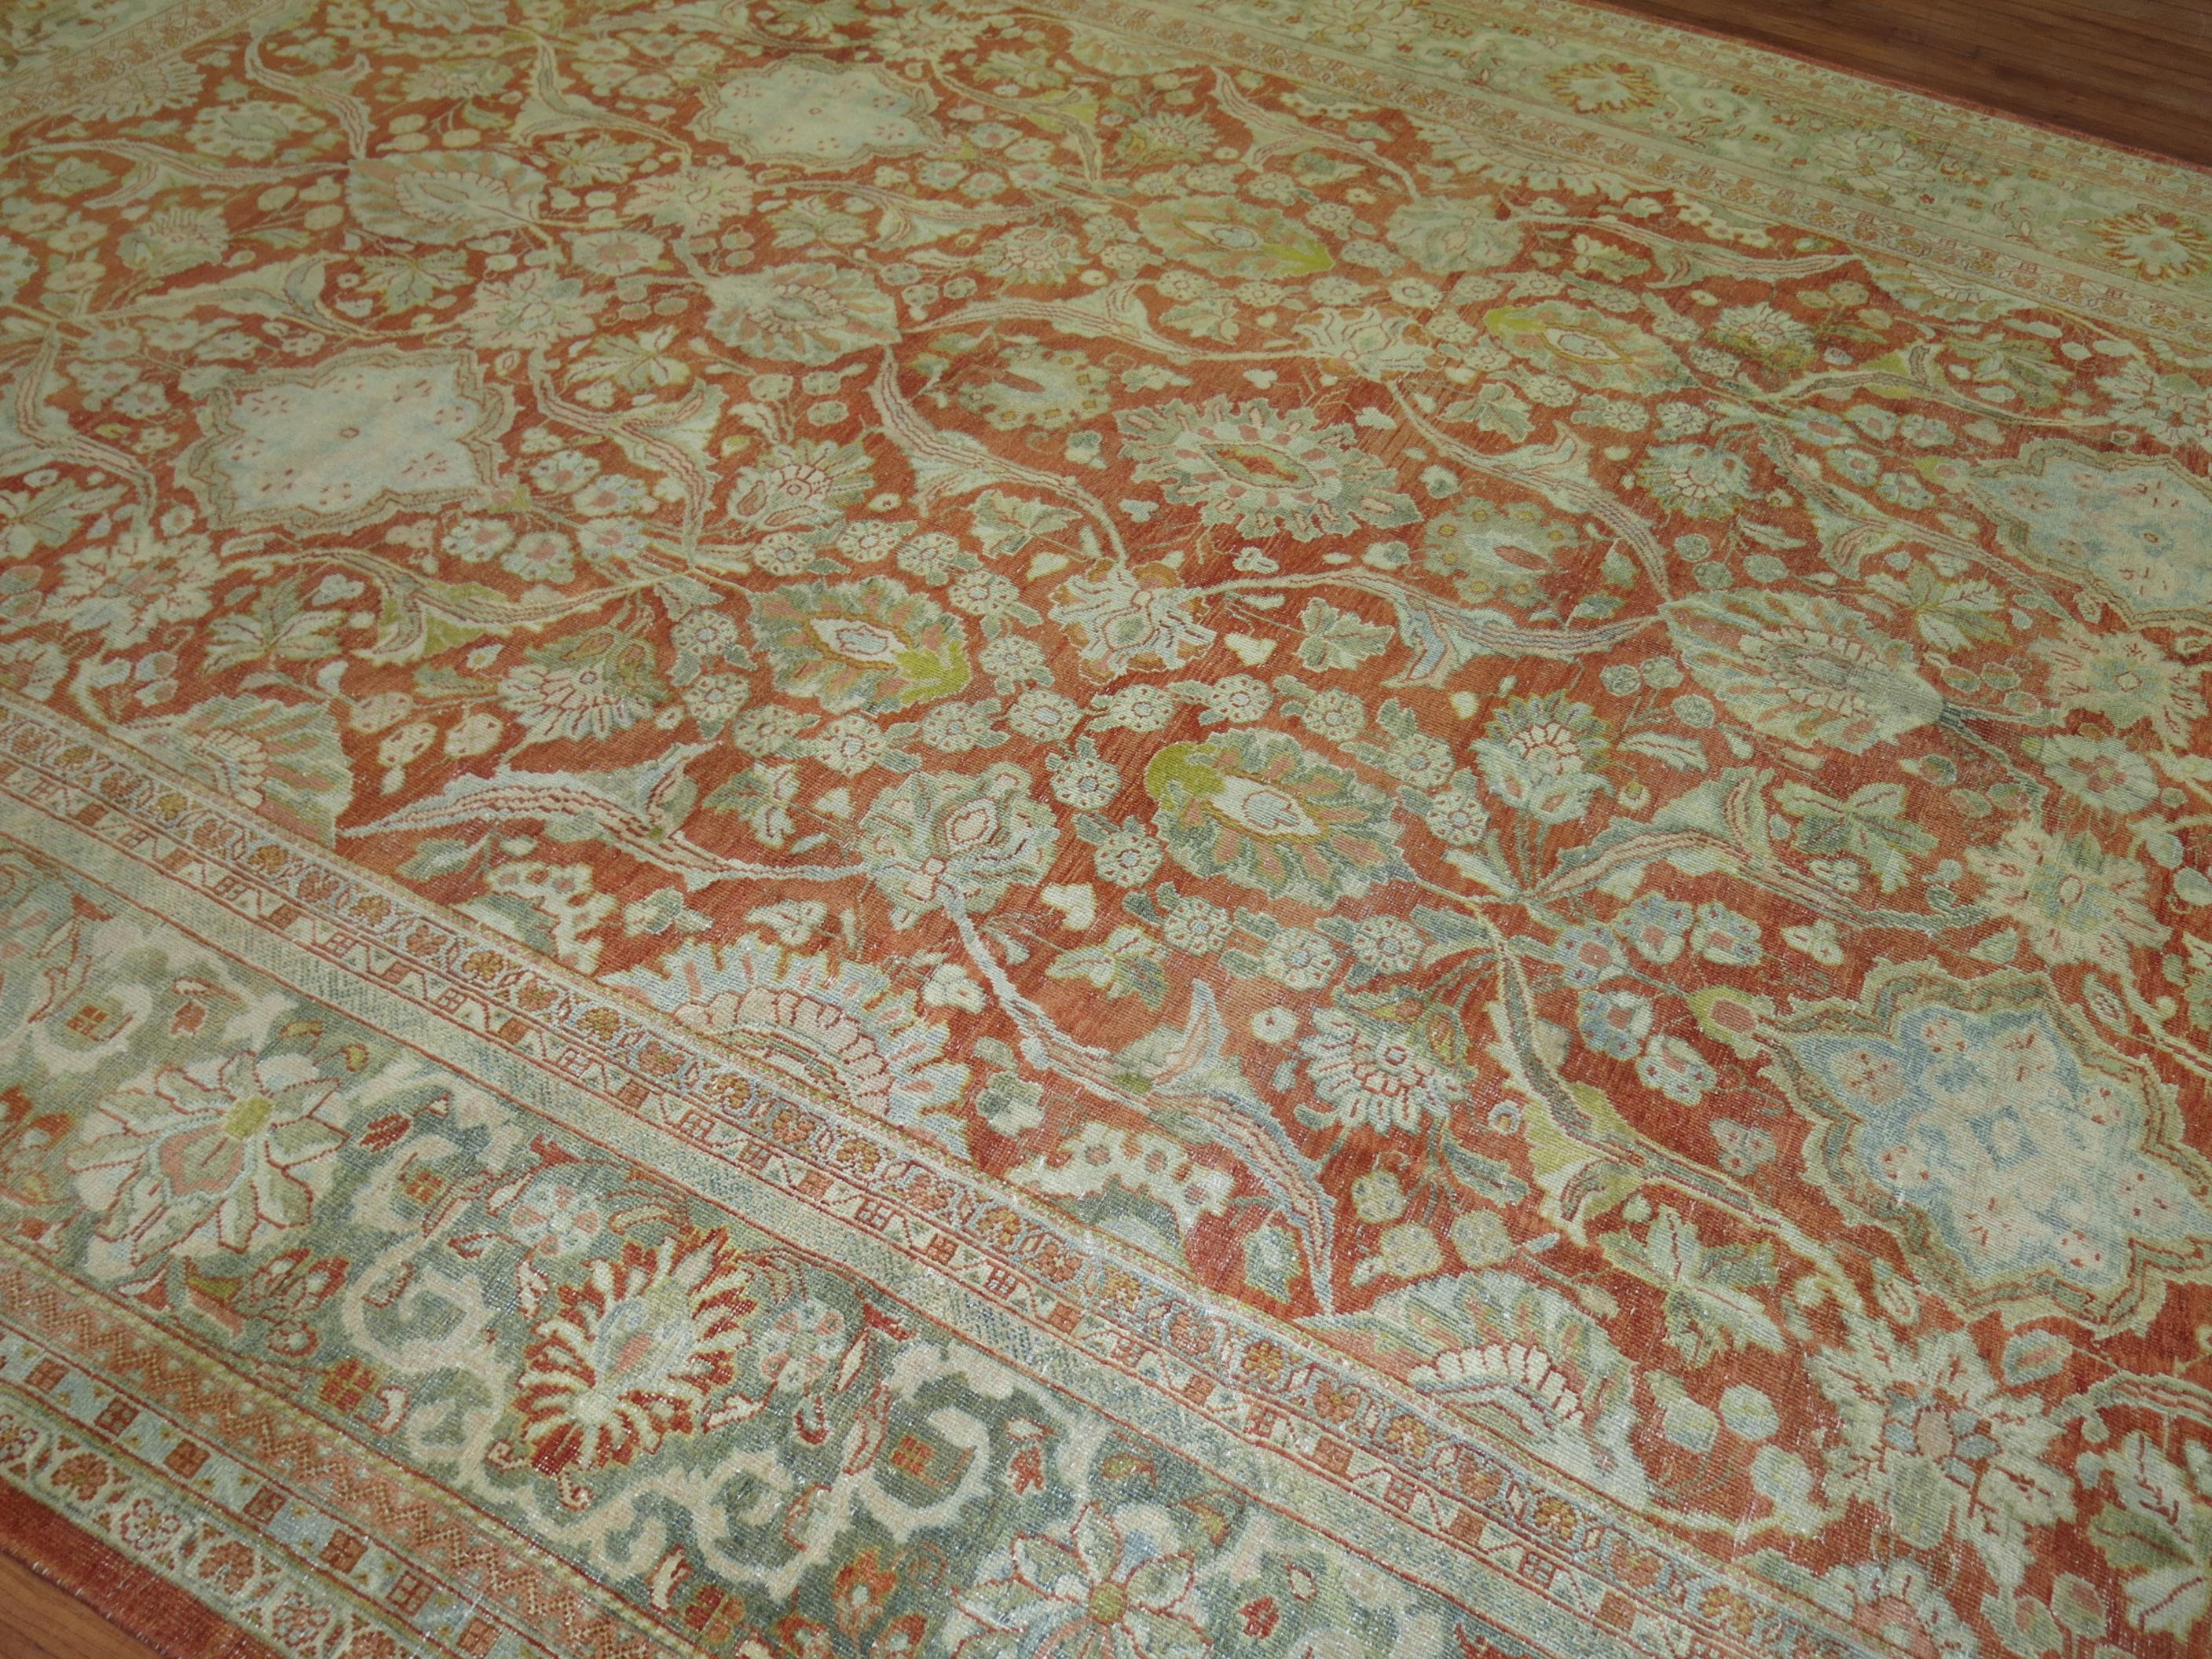 Zabihi Collection Oversize Antique Sultanabad Mahal Persian Carpet For Sale 2